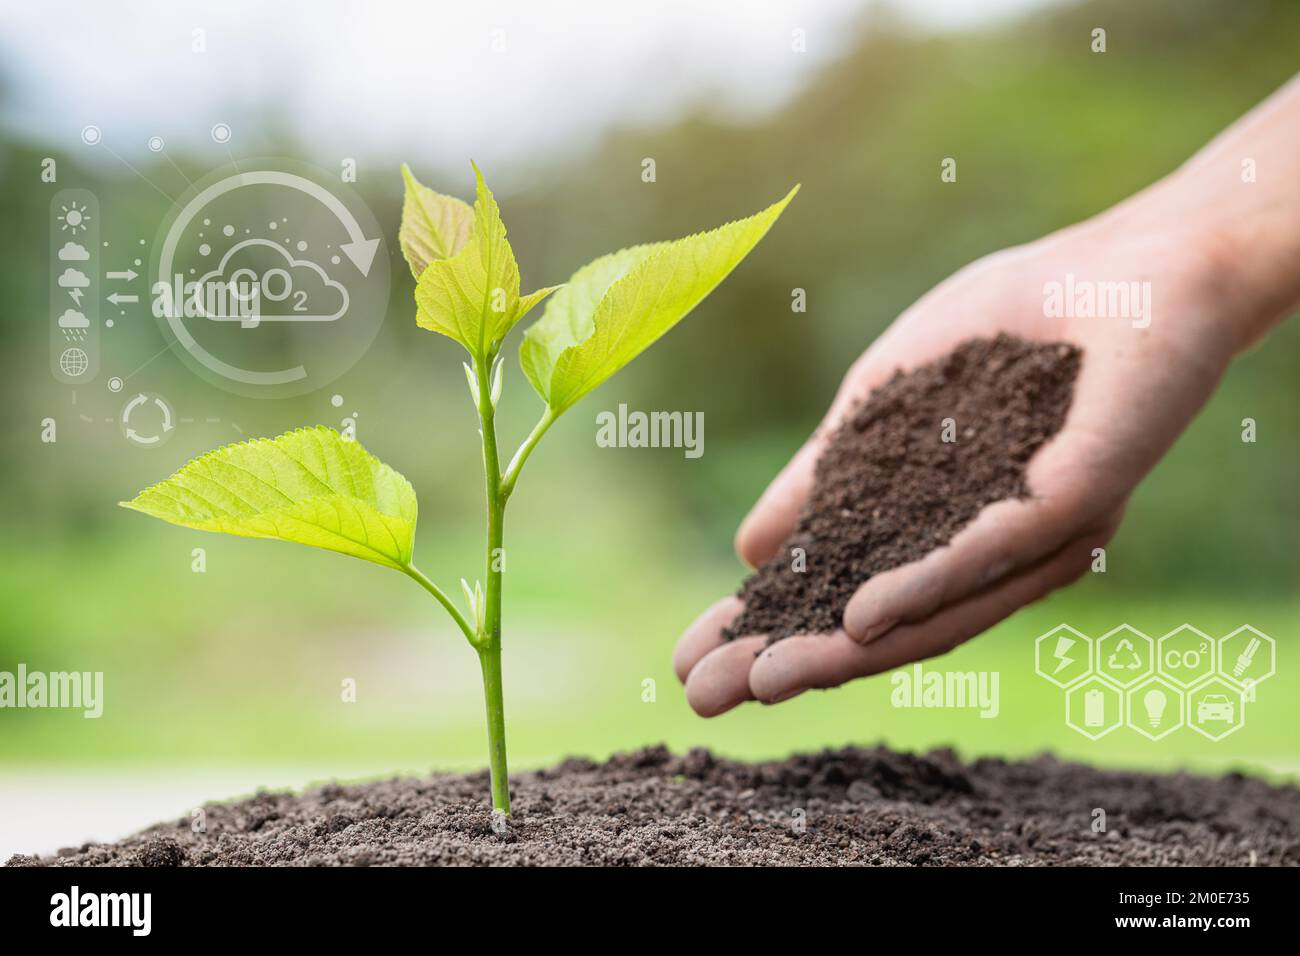 Fertile soil in the hand where the plant is being planted. Technology of renewable resources to reduce pollution. Forest conservation concept. Environ Stock Photo